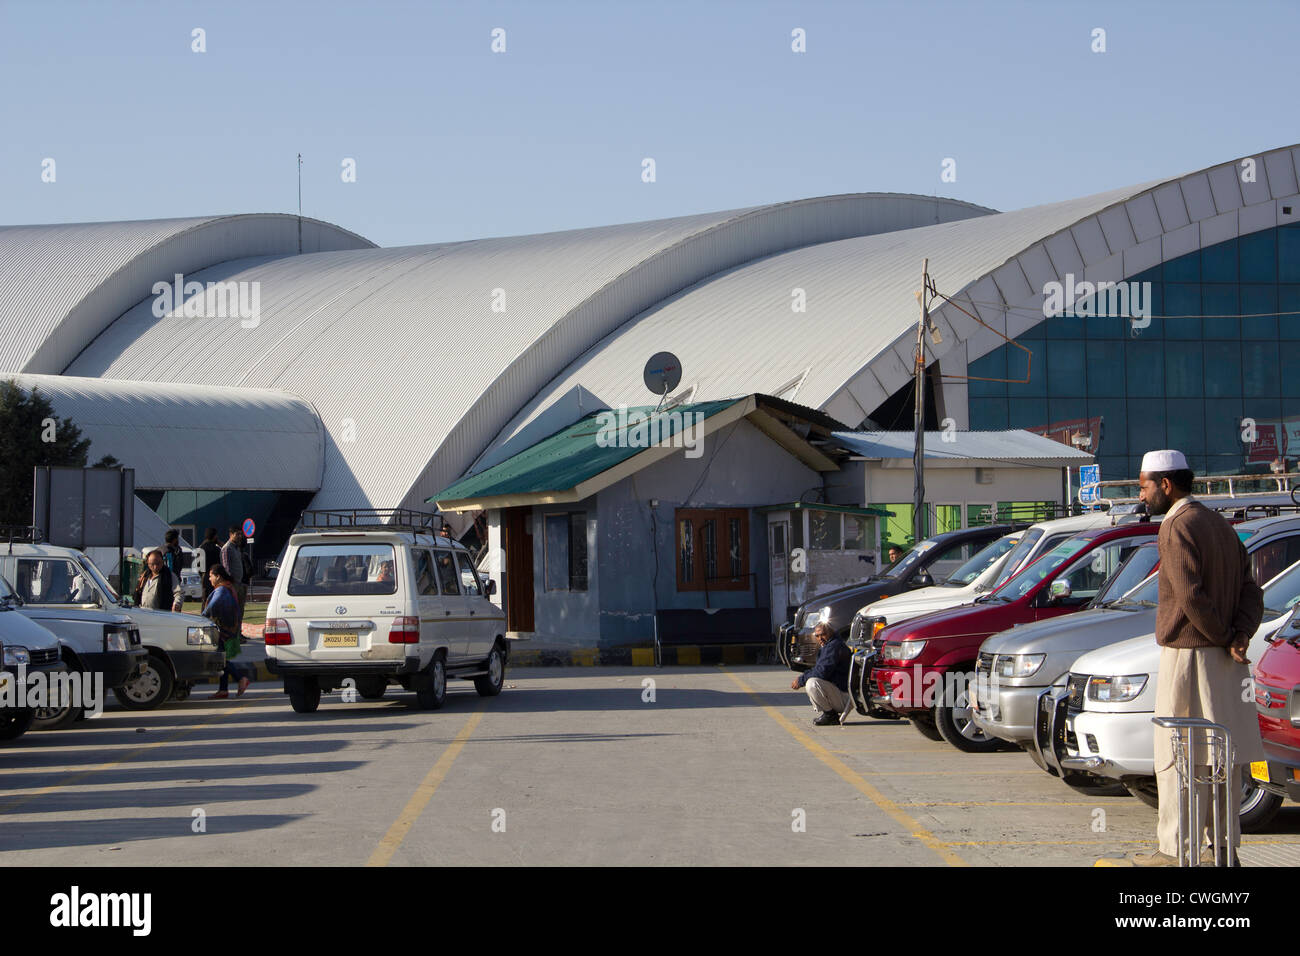 Taxis lined up outside the Srinagar airport in India. This is a high security area due to the history of terrorism in Kashmir. Stock Photo